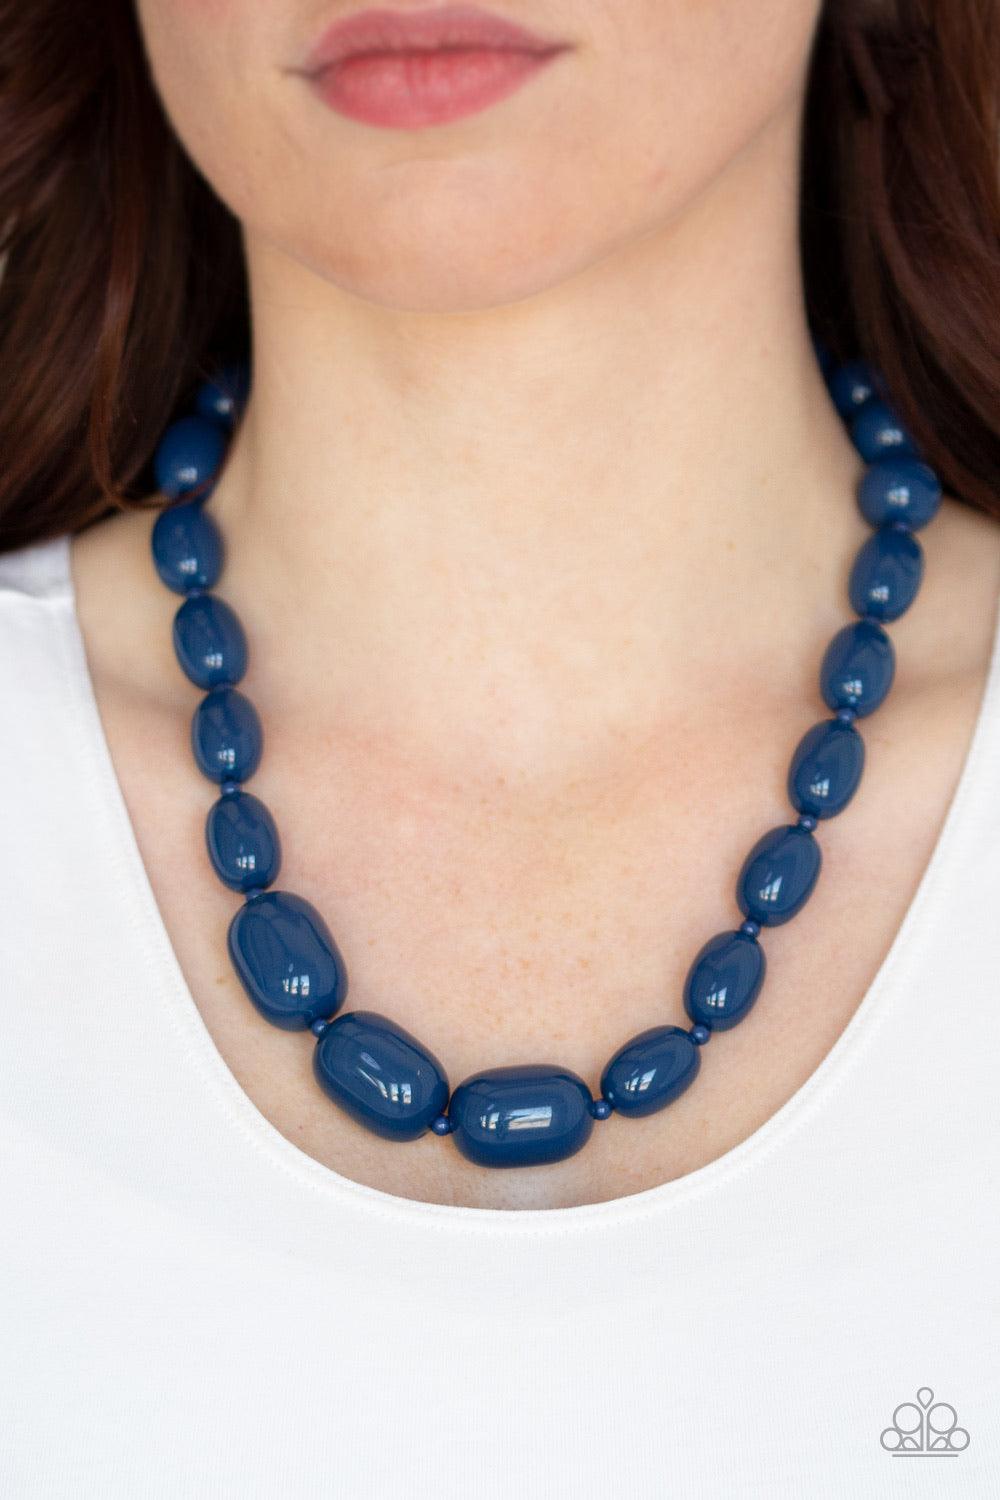 Paparazzi Accessories Poppin Popularity - Blue Infused with dainty Evening Blue beads, round Evening Blue beads trickle into bold oval beads, creating a bold pop of color below the collar. Features an adjustable clasp closure. Jewelry